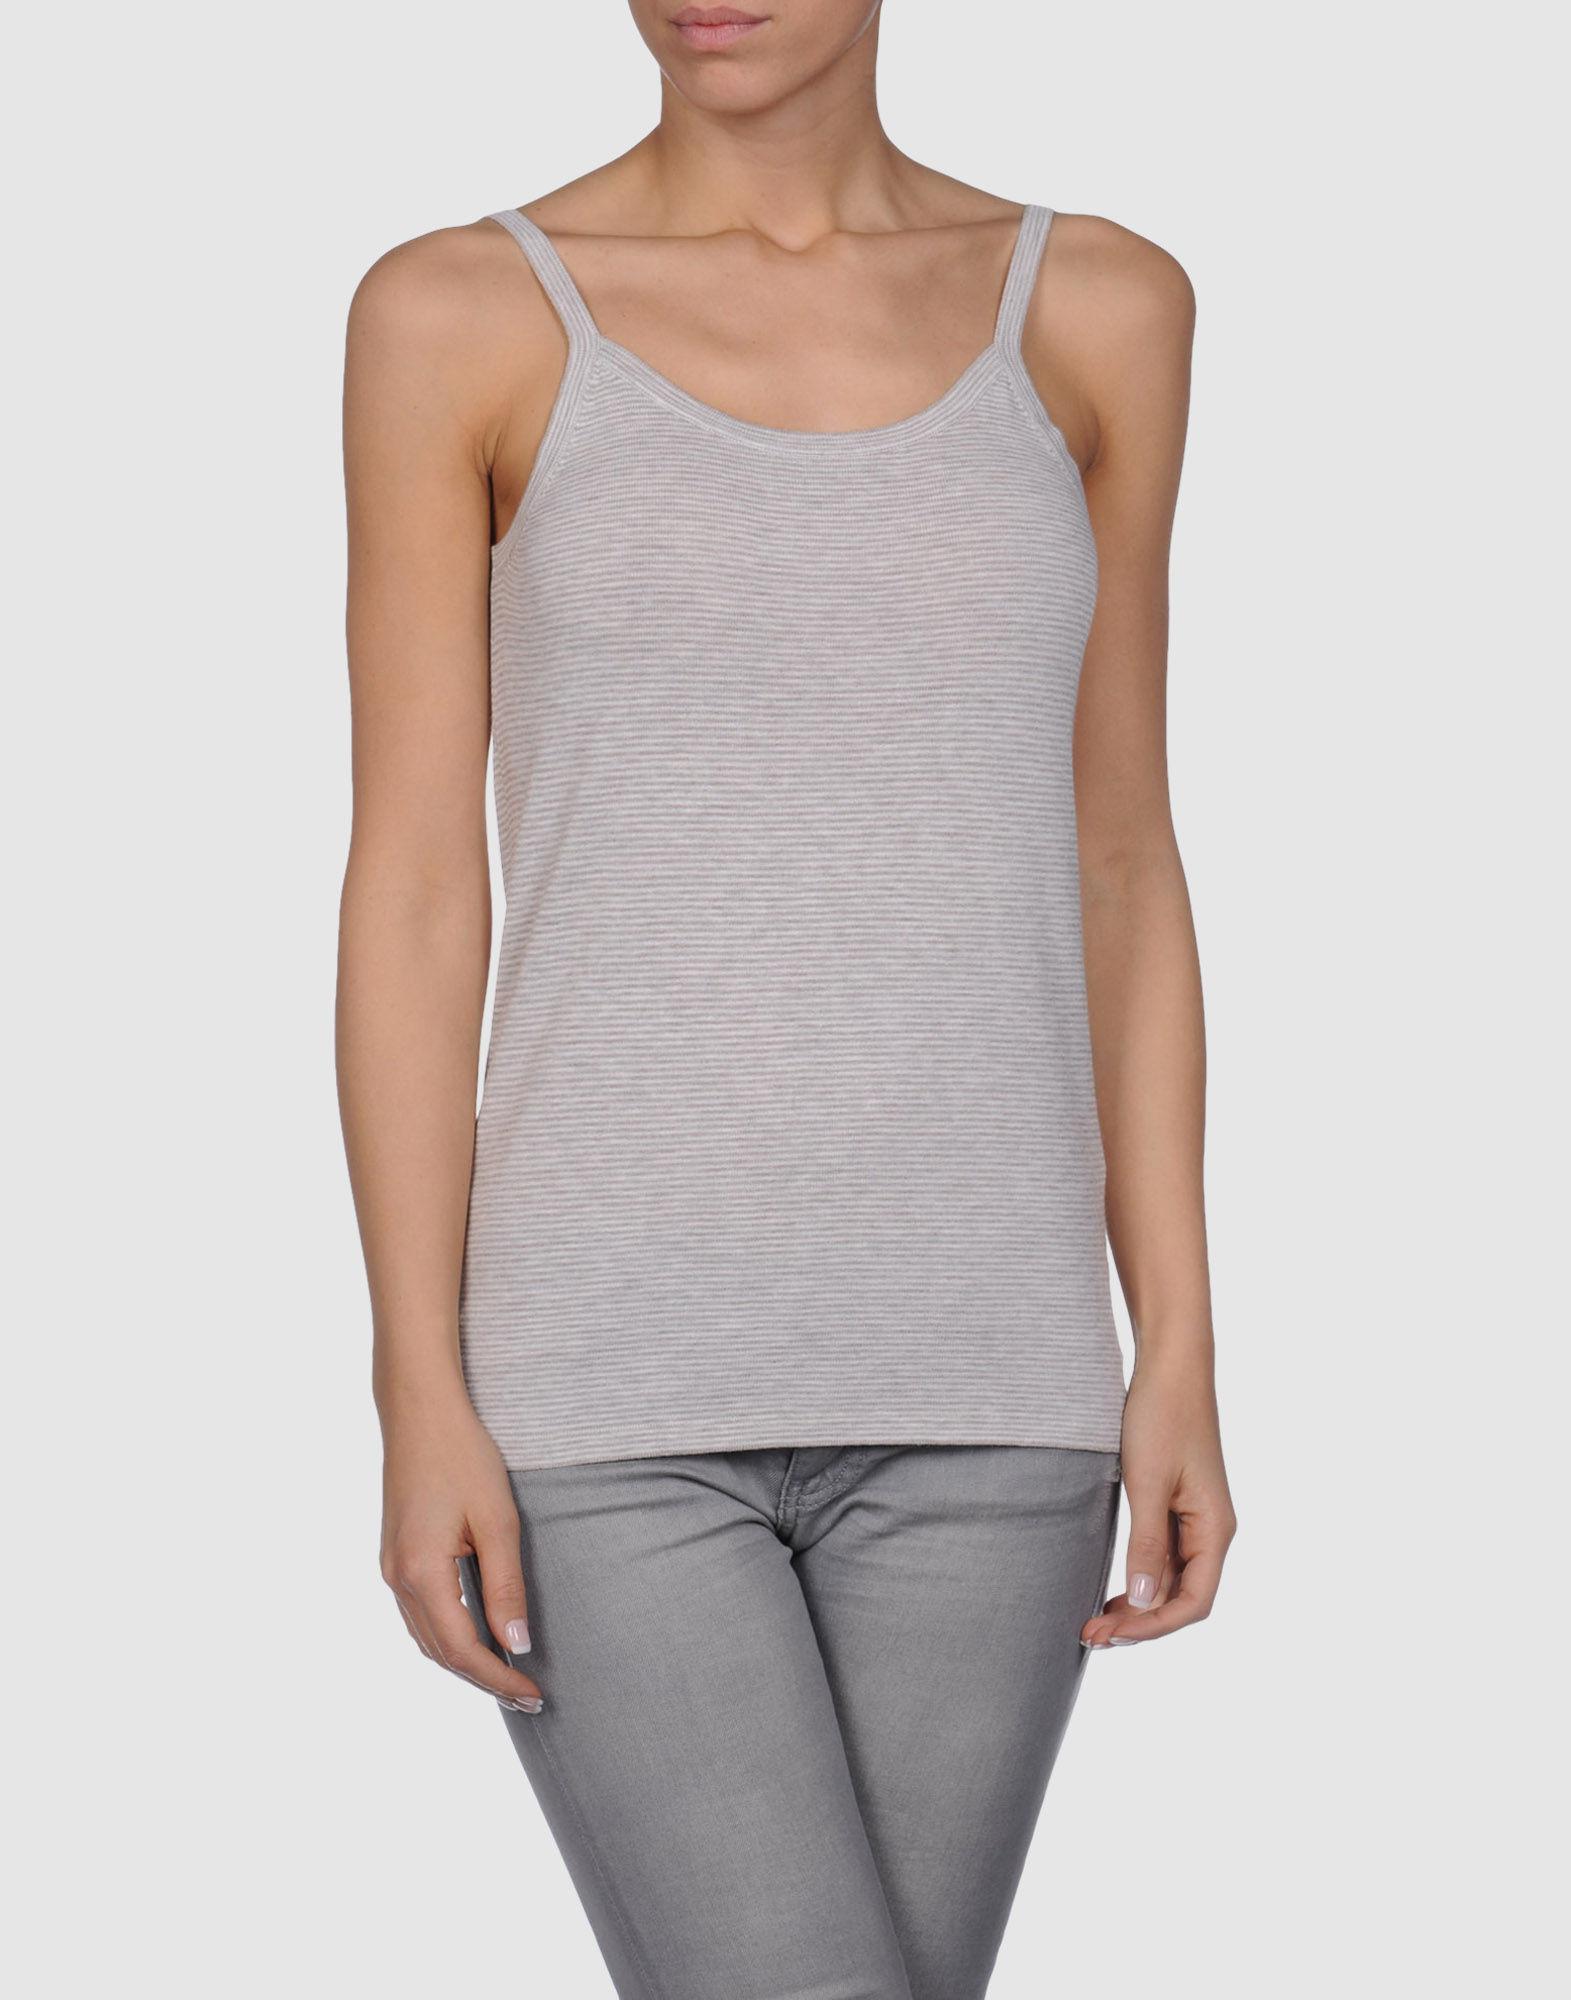 Foto Anneclaire Tops Mujer Gris rosado